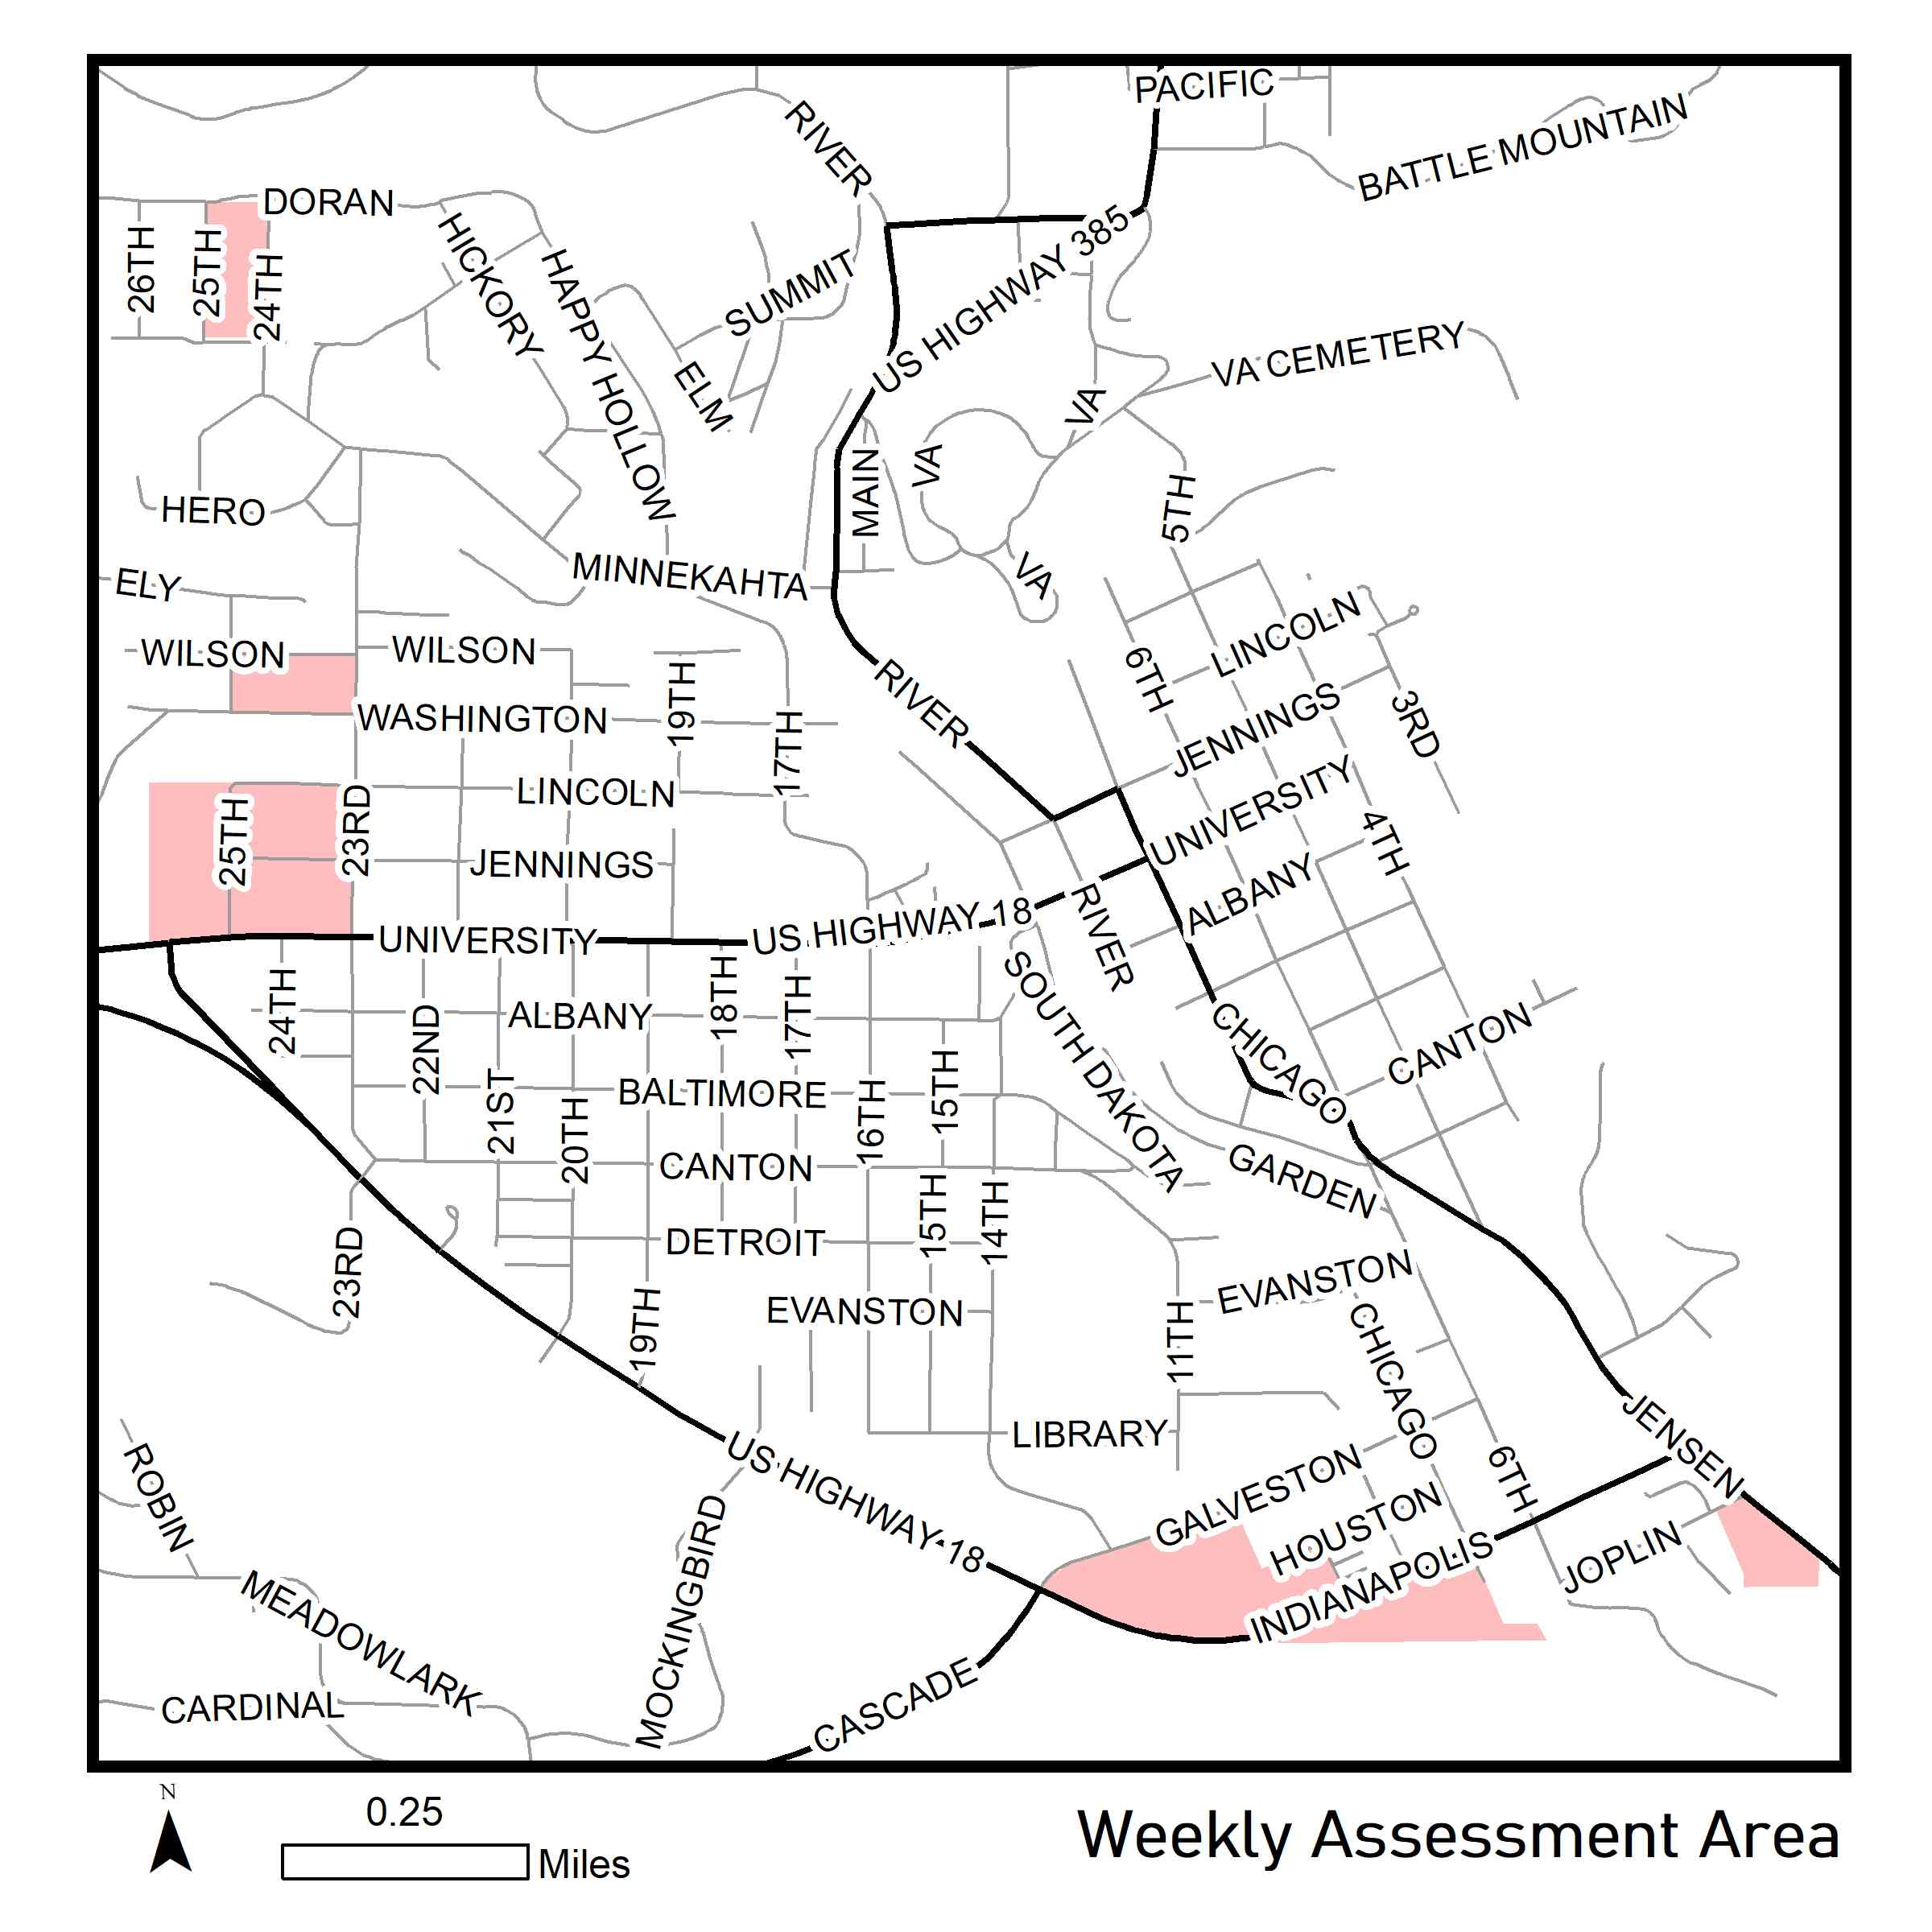 Map of reassessment area for week of July 20, 2020.